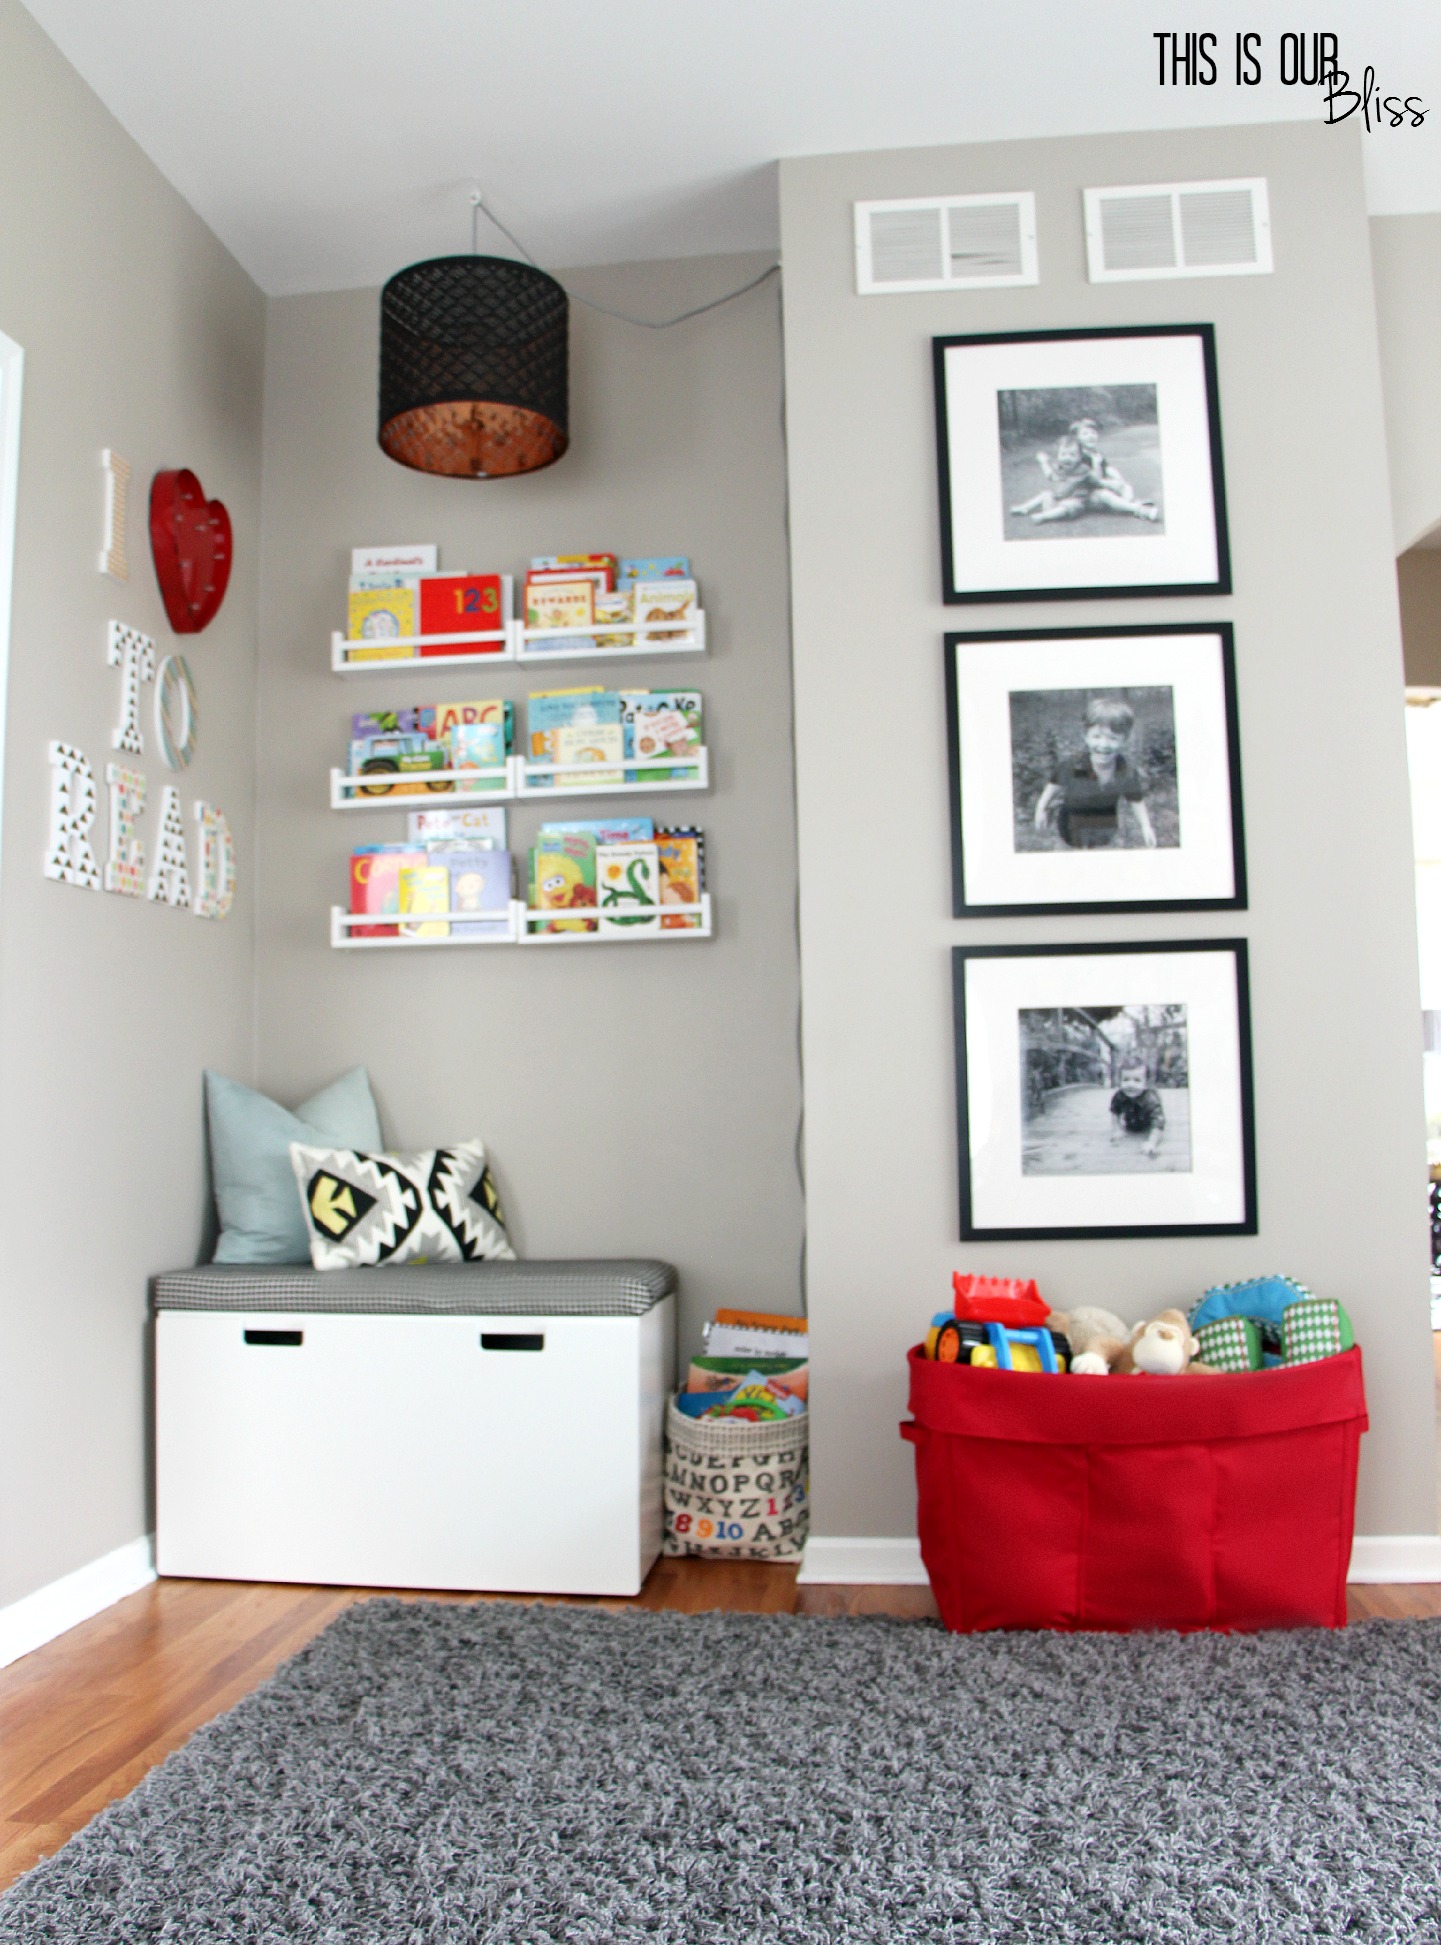 playroom reading nook - DIY reading nook light - reading corner - kids room - This is our Bliss